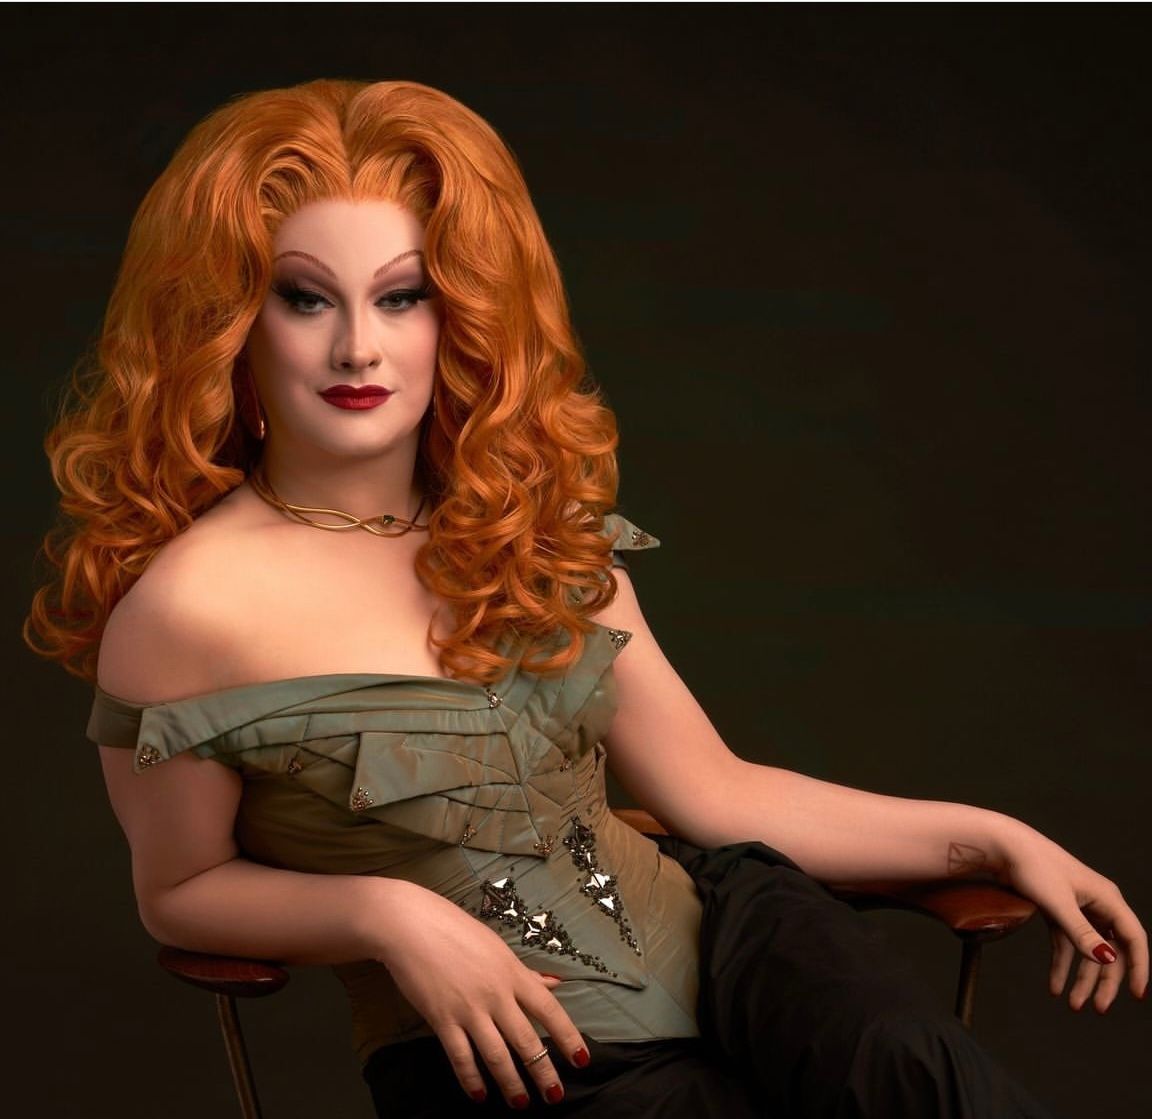 JINKX MONSOON Returns to Provincetown Town Hall on Sunday, July 14th @ 6:30PM & 9PM!